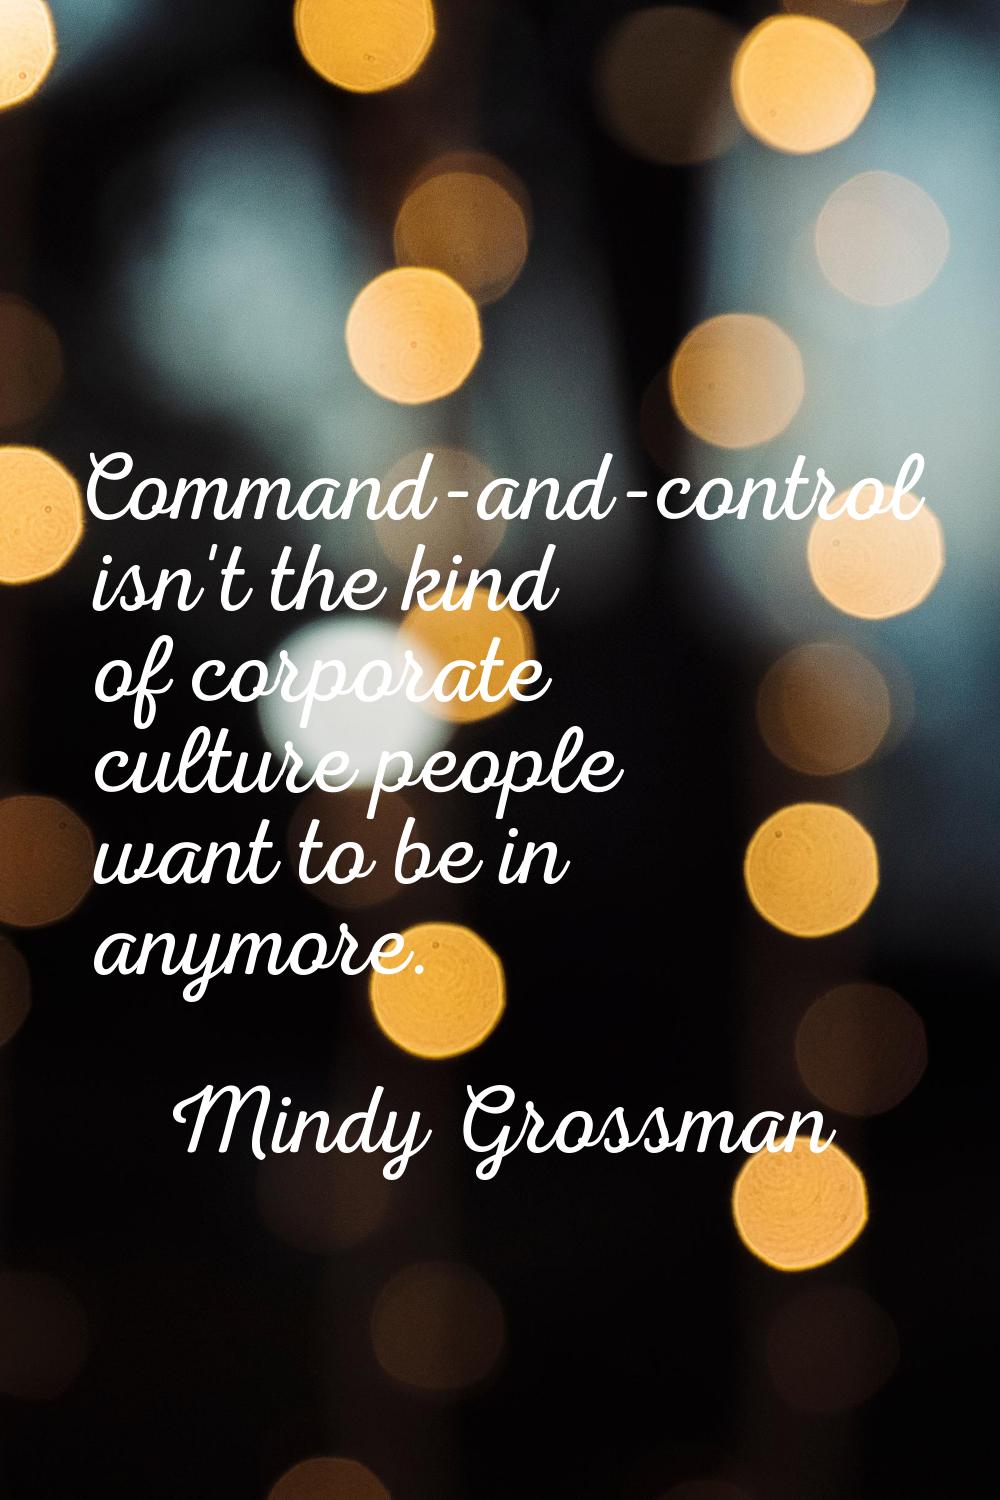 Command-and-control isn't the kind of corporate culture people want to be in anymore.